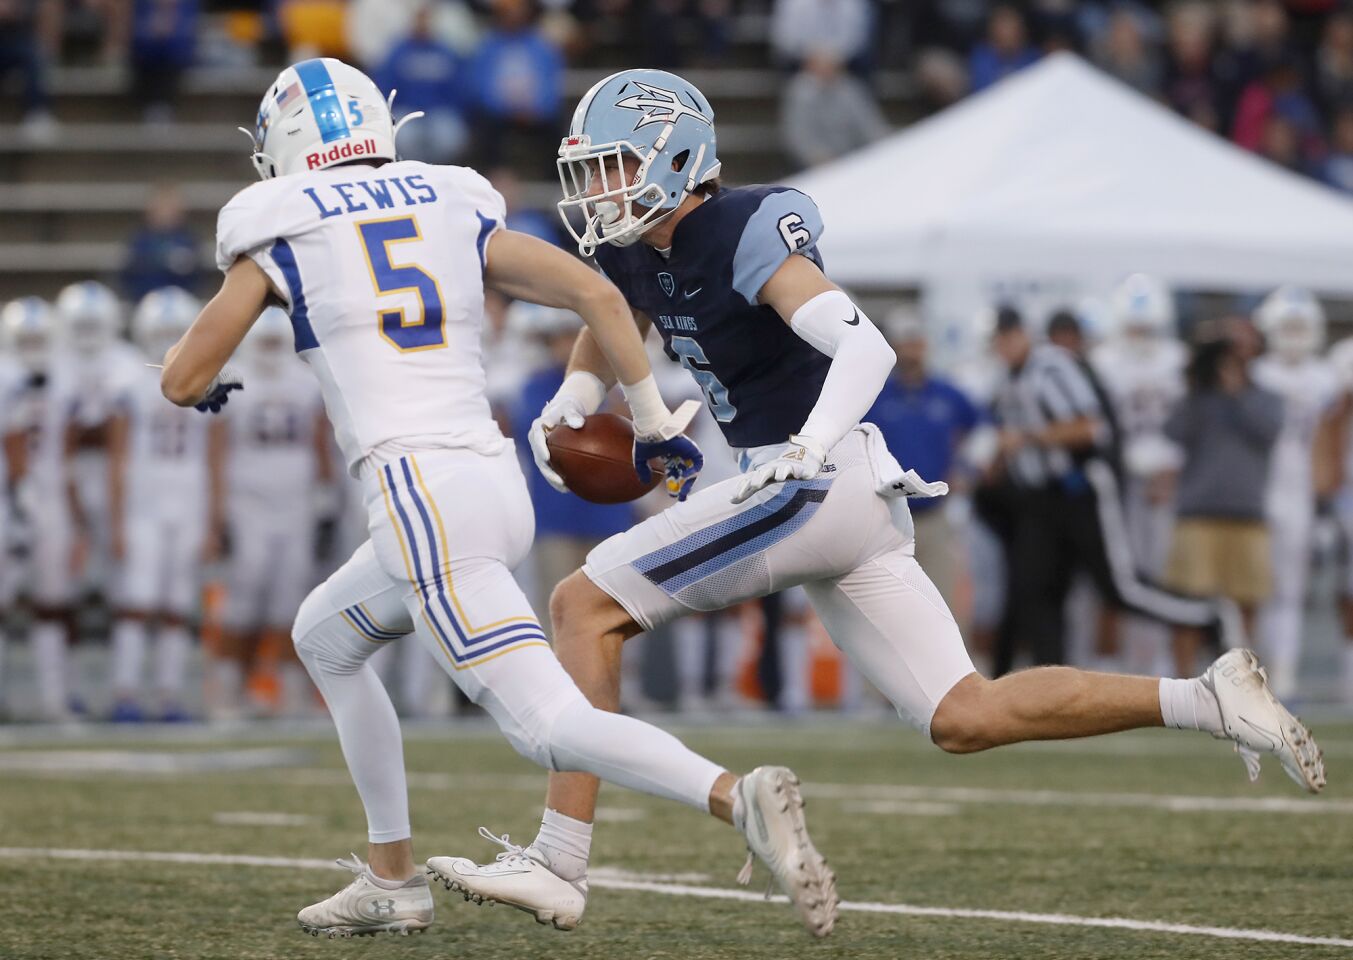 Corona del Mar's John Humphreys, right, rushes for a first down during the first half.